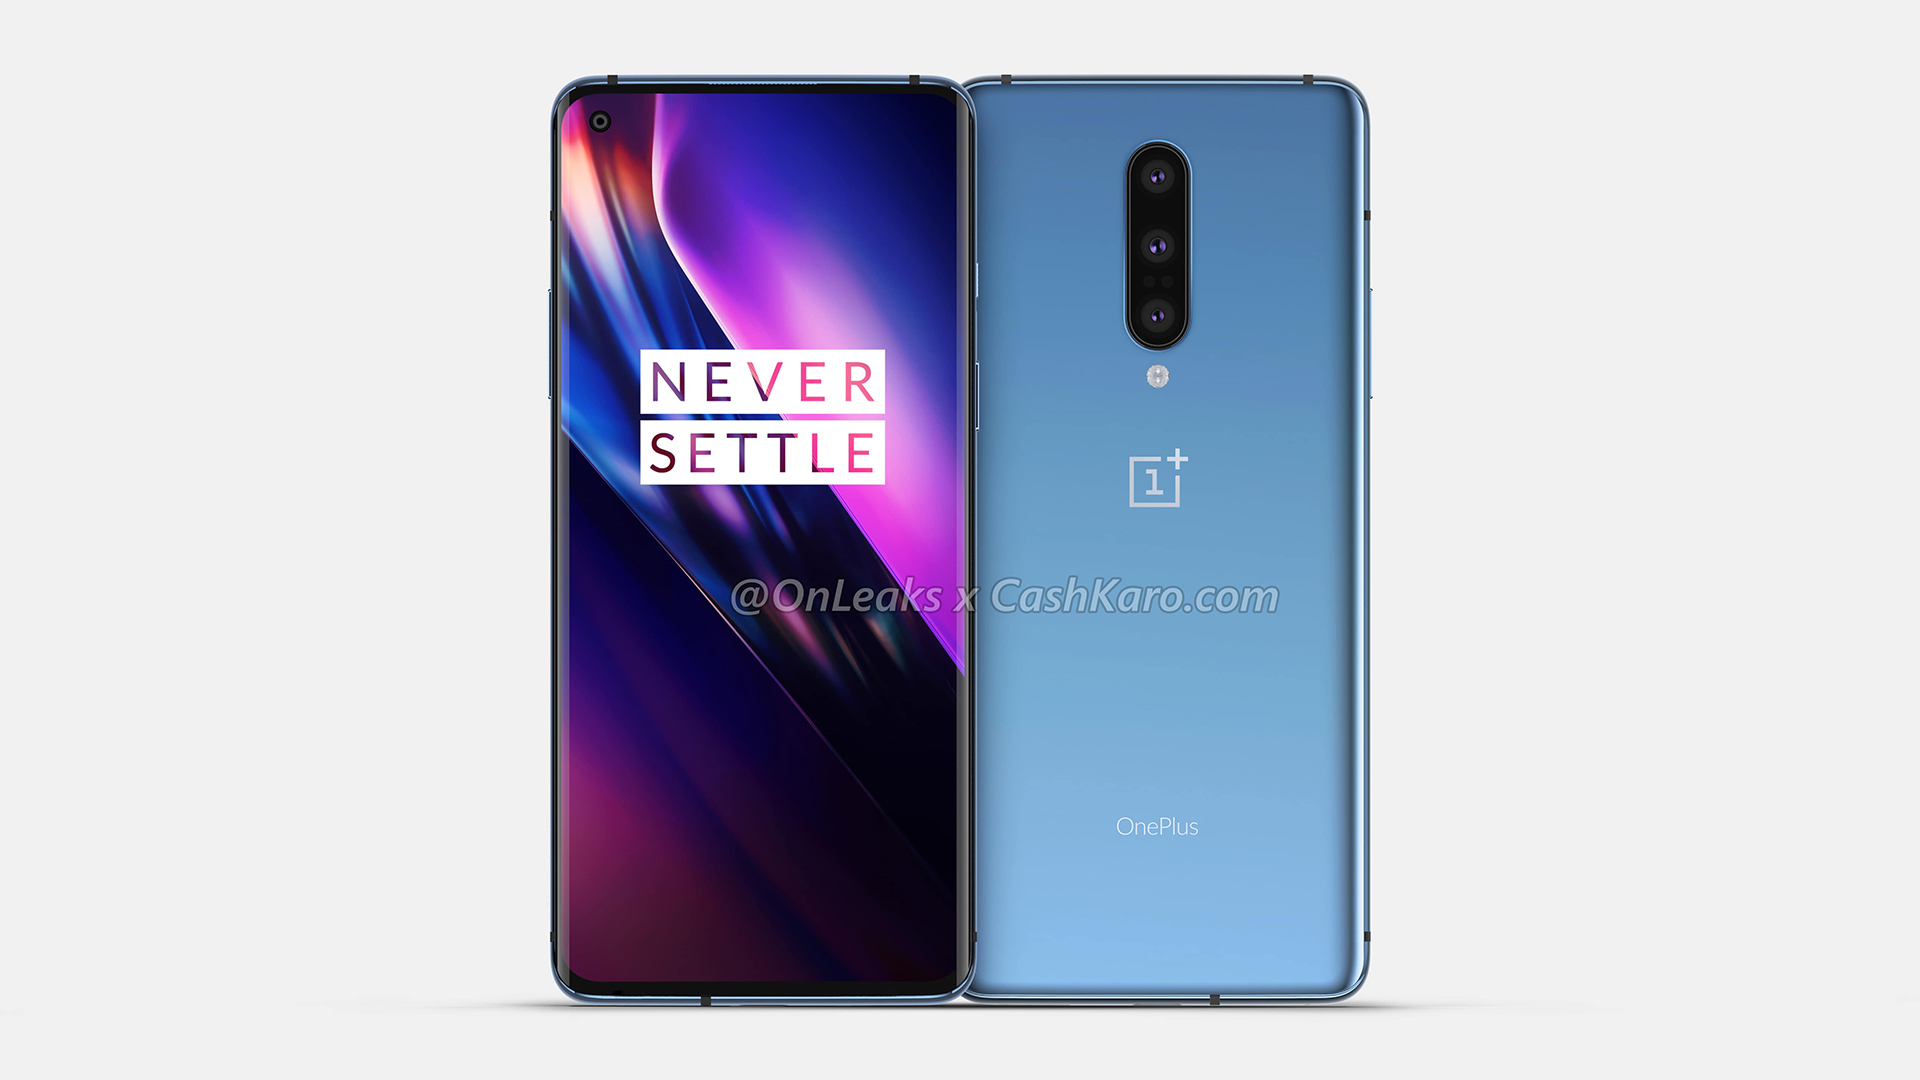 OnePlus has announced an online pop-up event for the OnePlus 8 series.